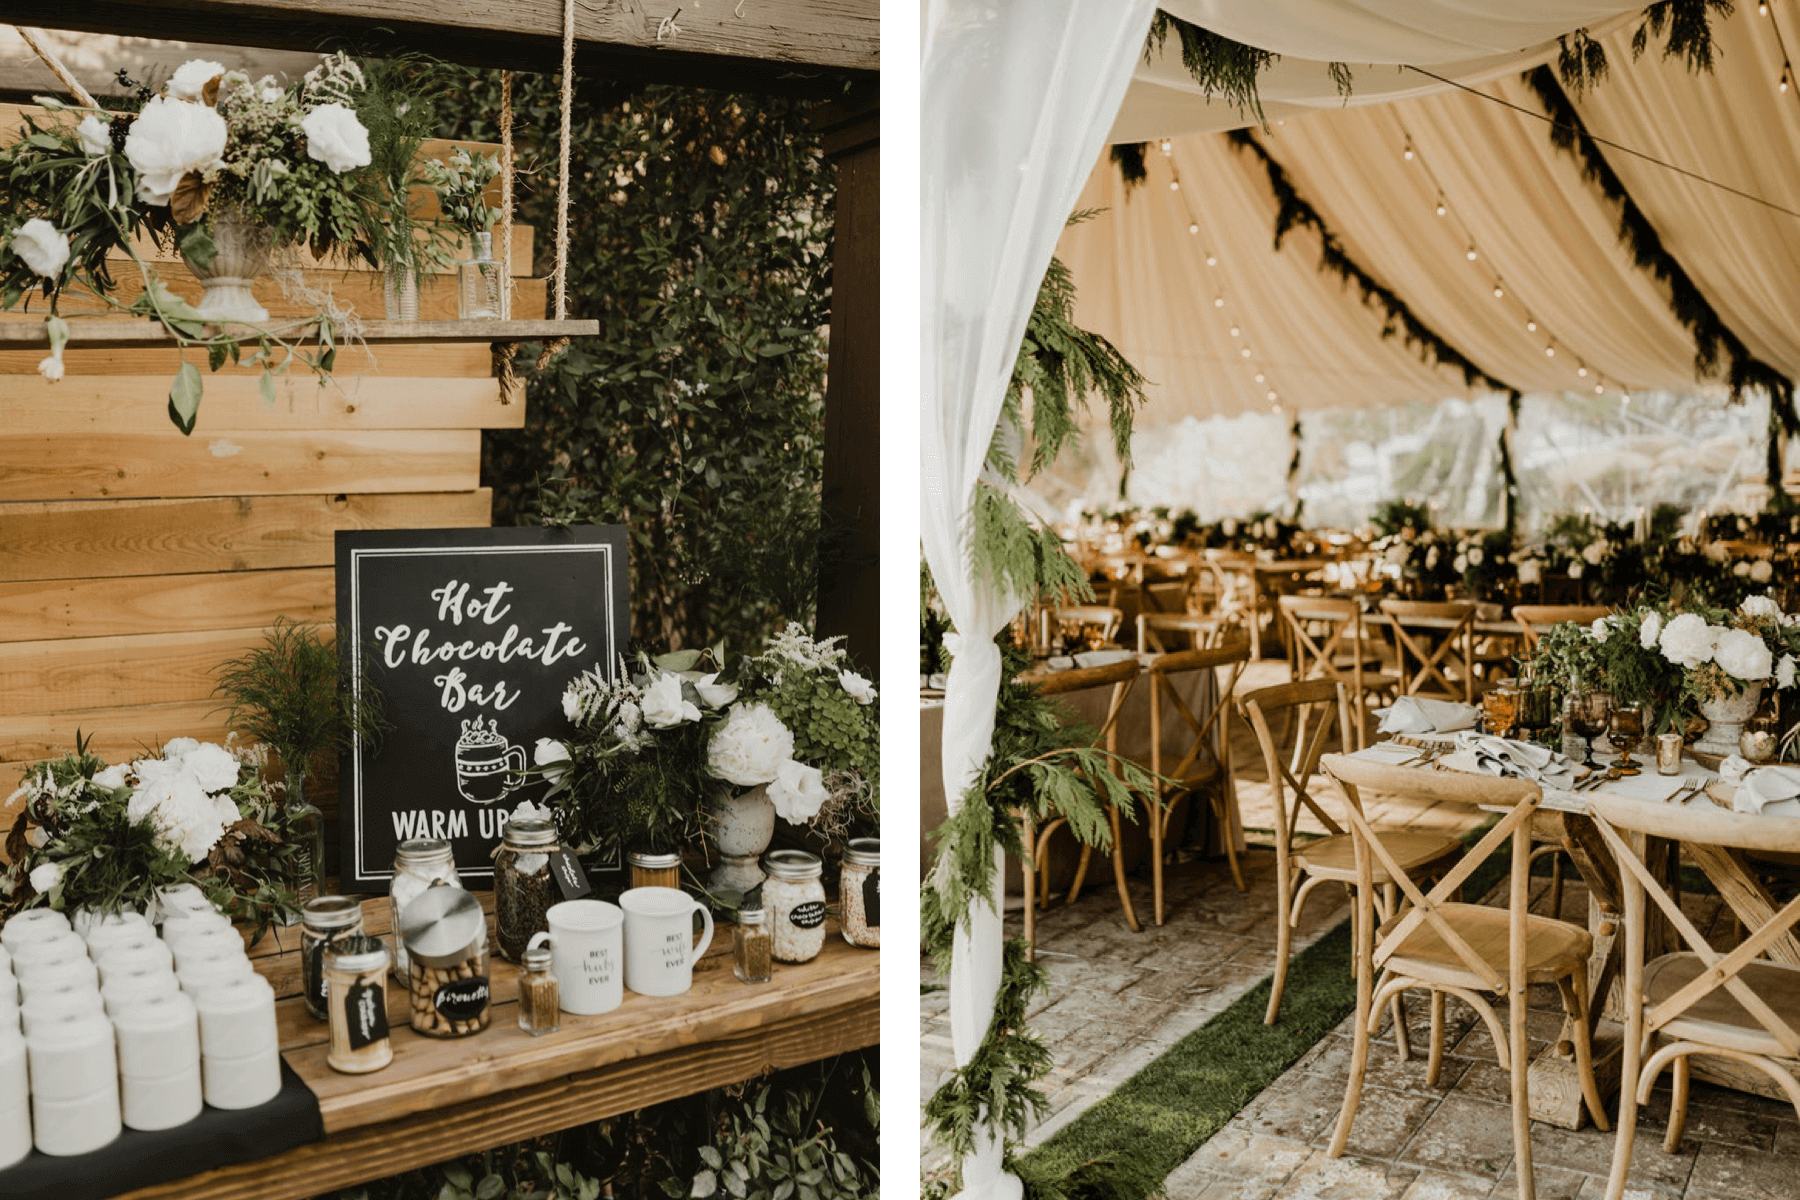 Left: A decorated hot chocolate bar | Right: A peek inside a wedding tent with decorated tables and greenery.